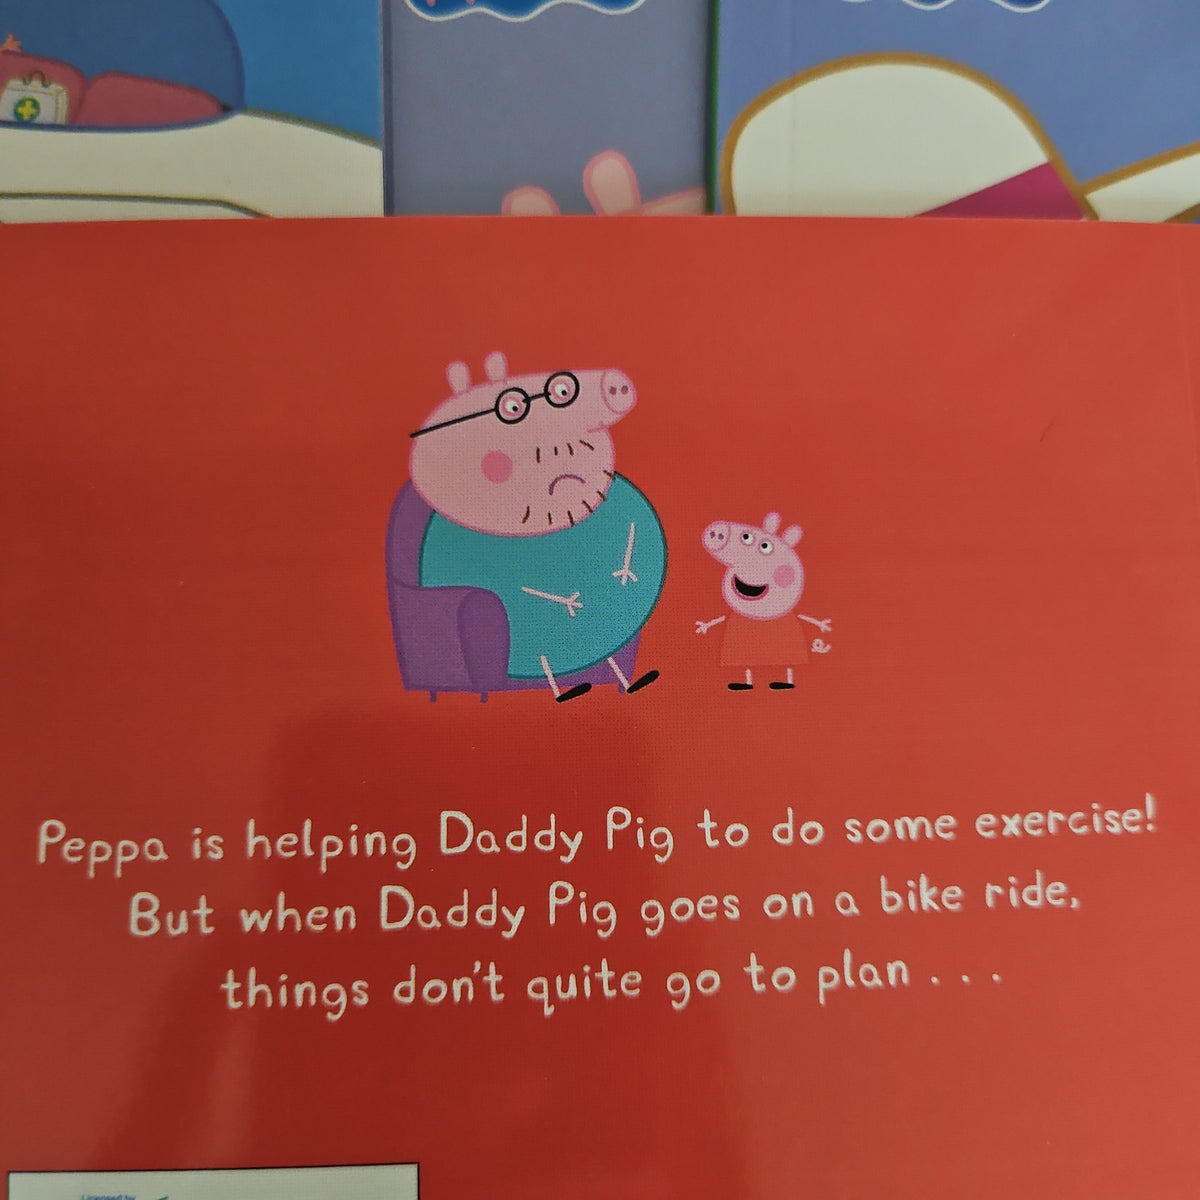 The Amazing Peppa Pig Collection:Daddy Pig's exercises